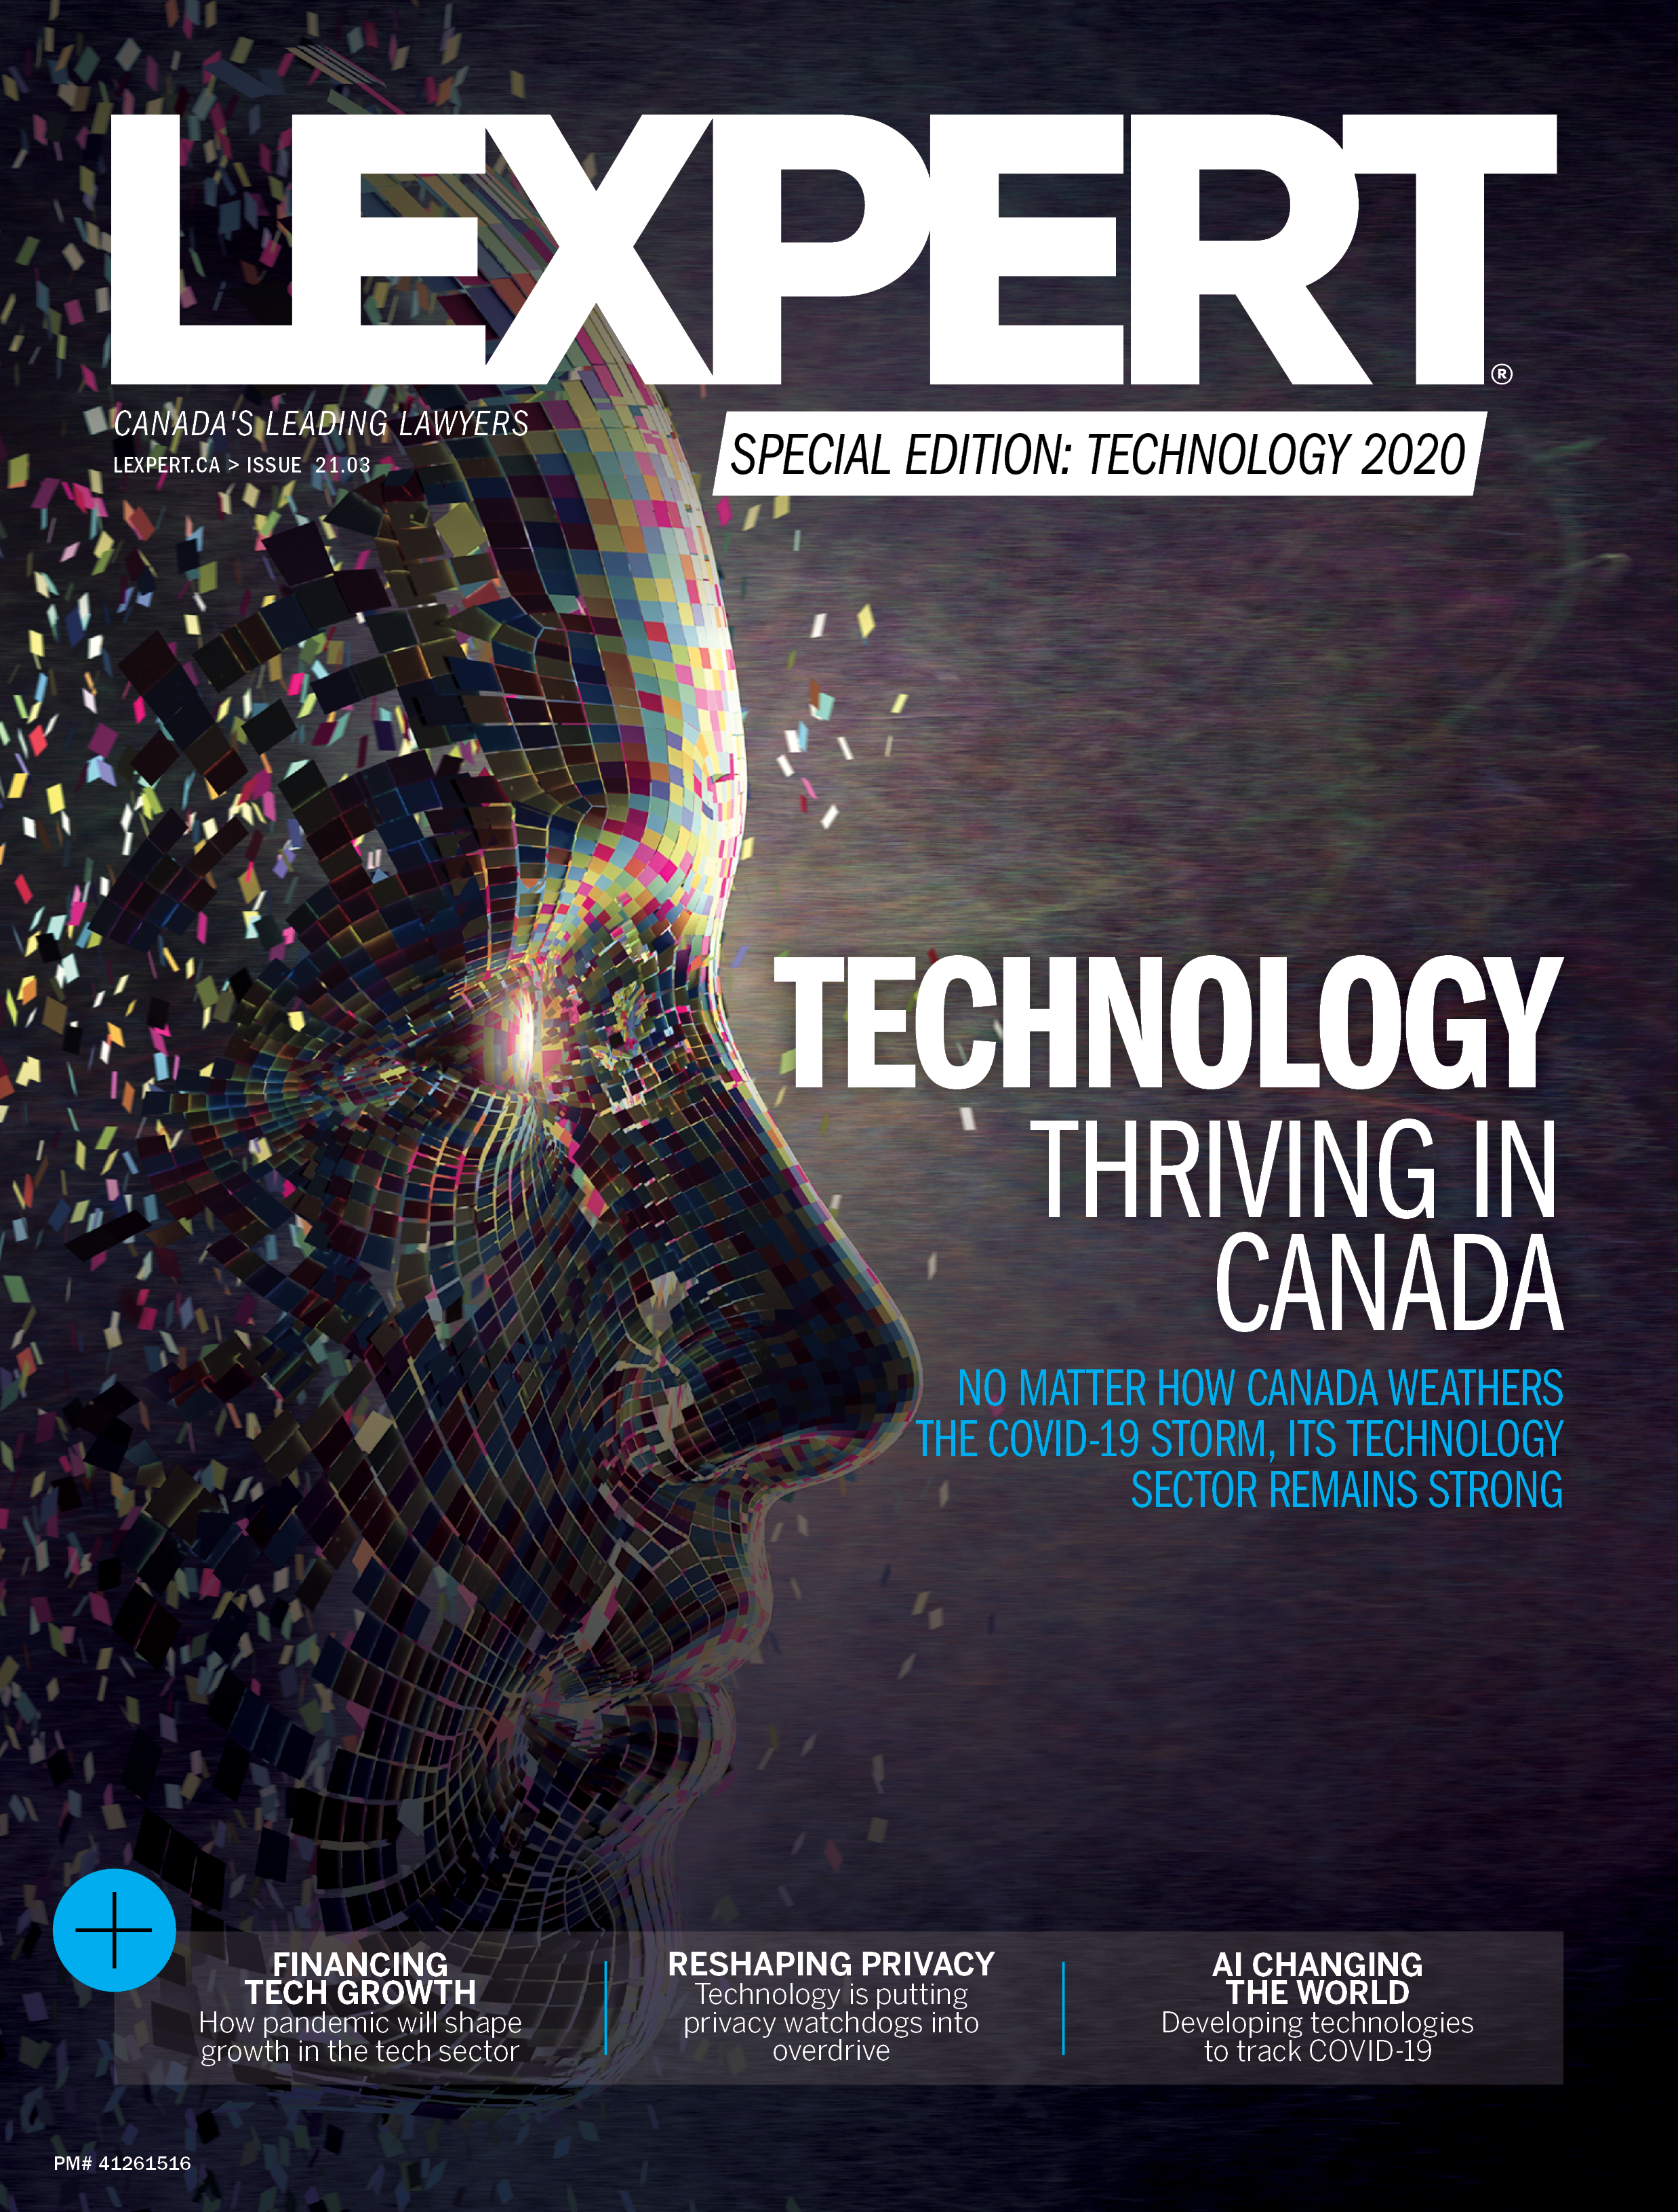 Lexpert Publishes Special Edition: Technology 2020 